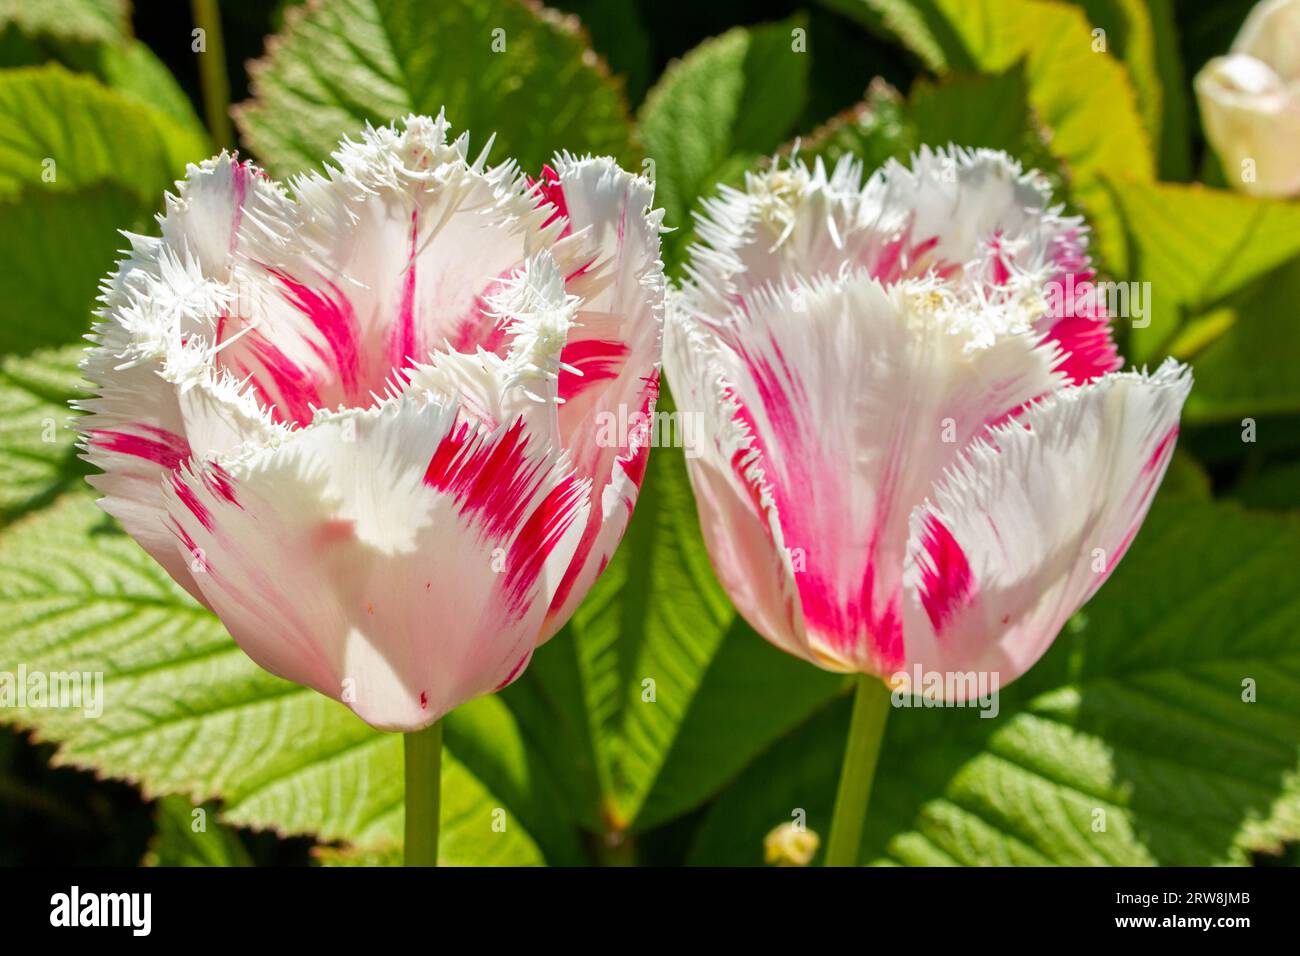 Two pink and white tulips bask closely together in the sun, their vibrant colors and delicate petals embracing the warmth of the day. Stock Photo